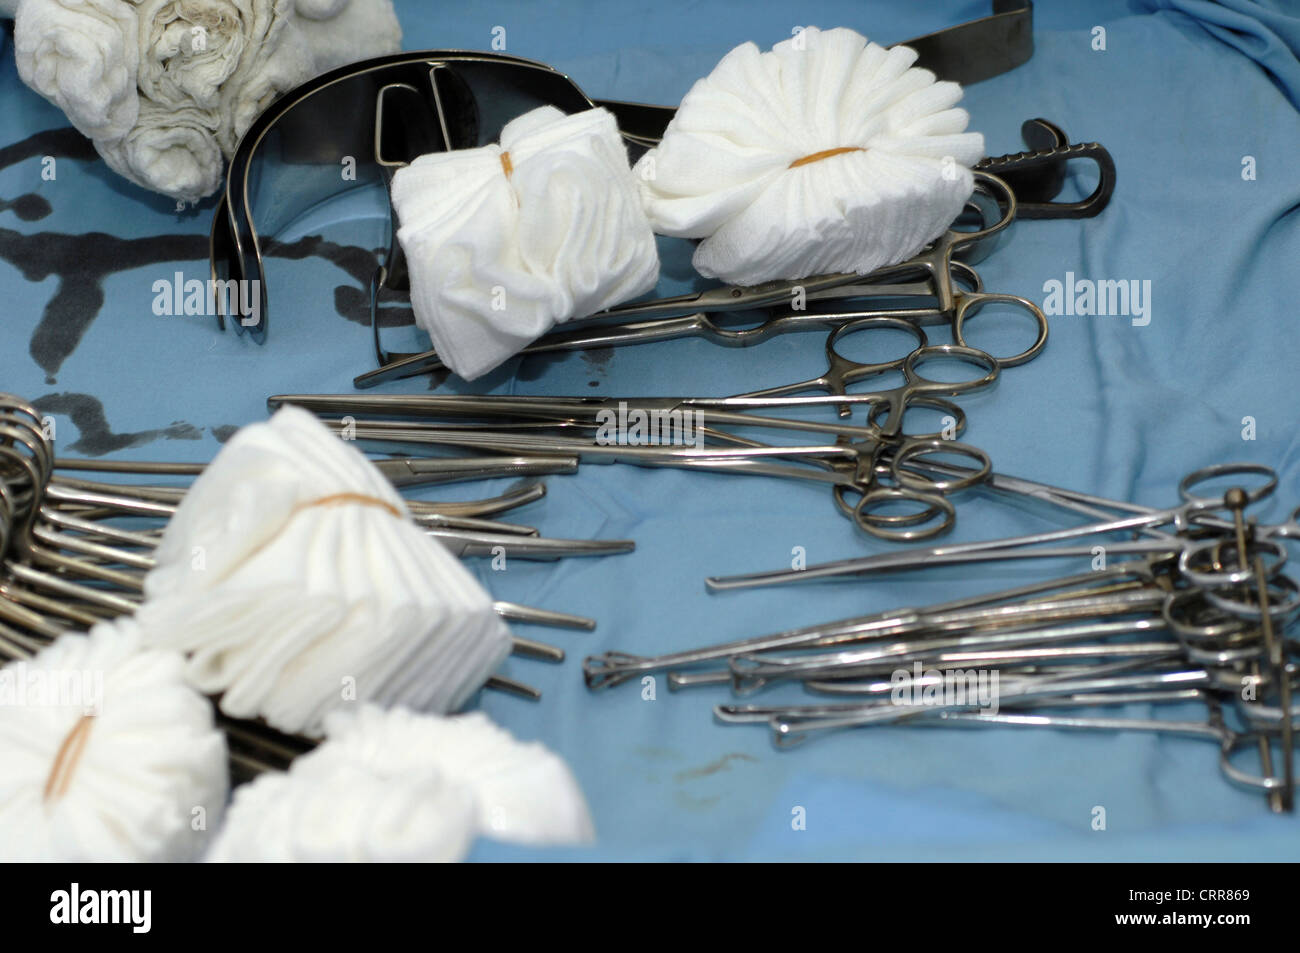 A tray of sterile surgical equipment, including retractors, forceps and swabs. Stock Photo